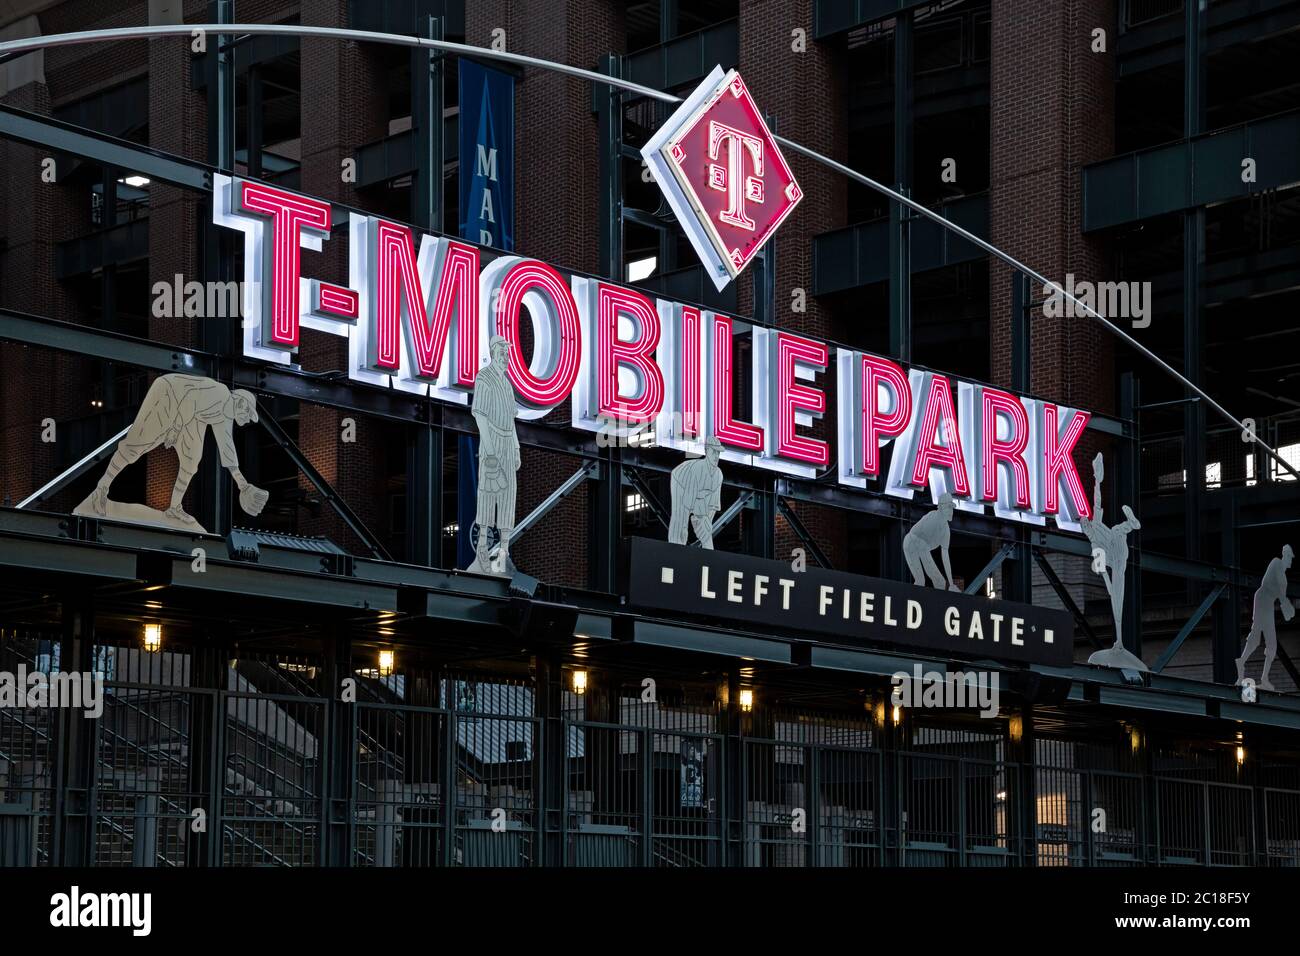 WA16774-00...WASHINGTON - Left Field entrance gate to T-Mobile Park, the home field stadium of the Seattle Mariners baseball team. 2019 Stock Photo